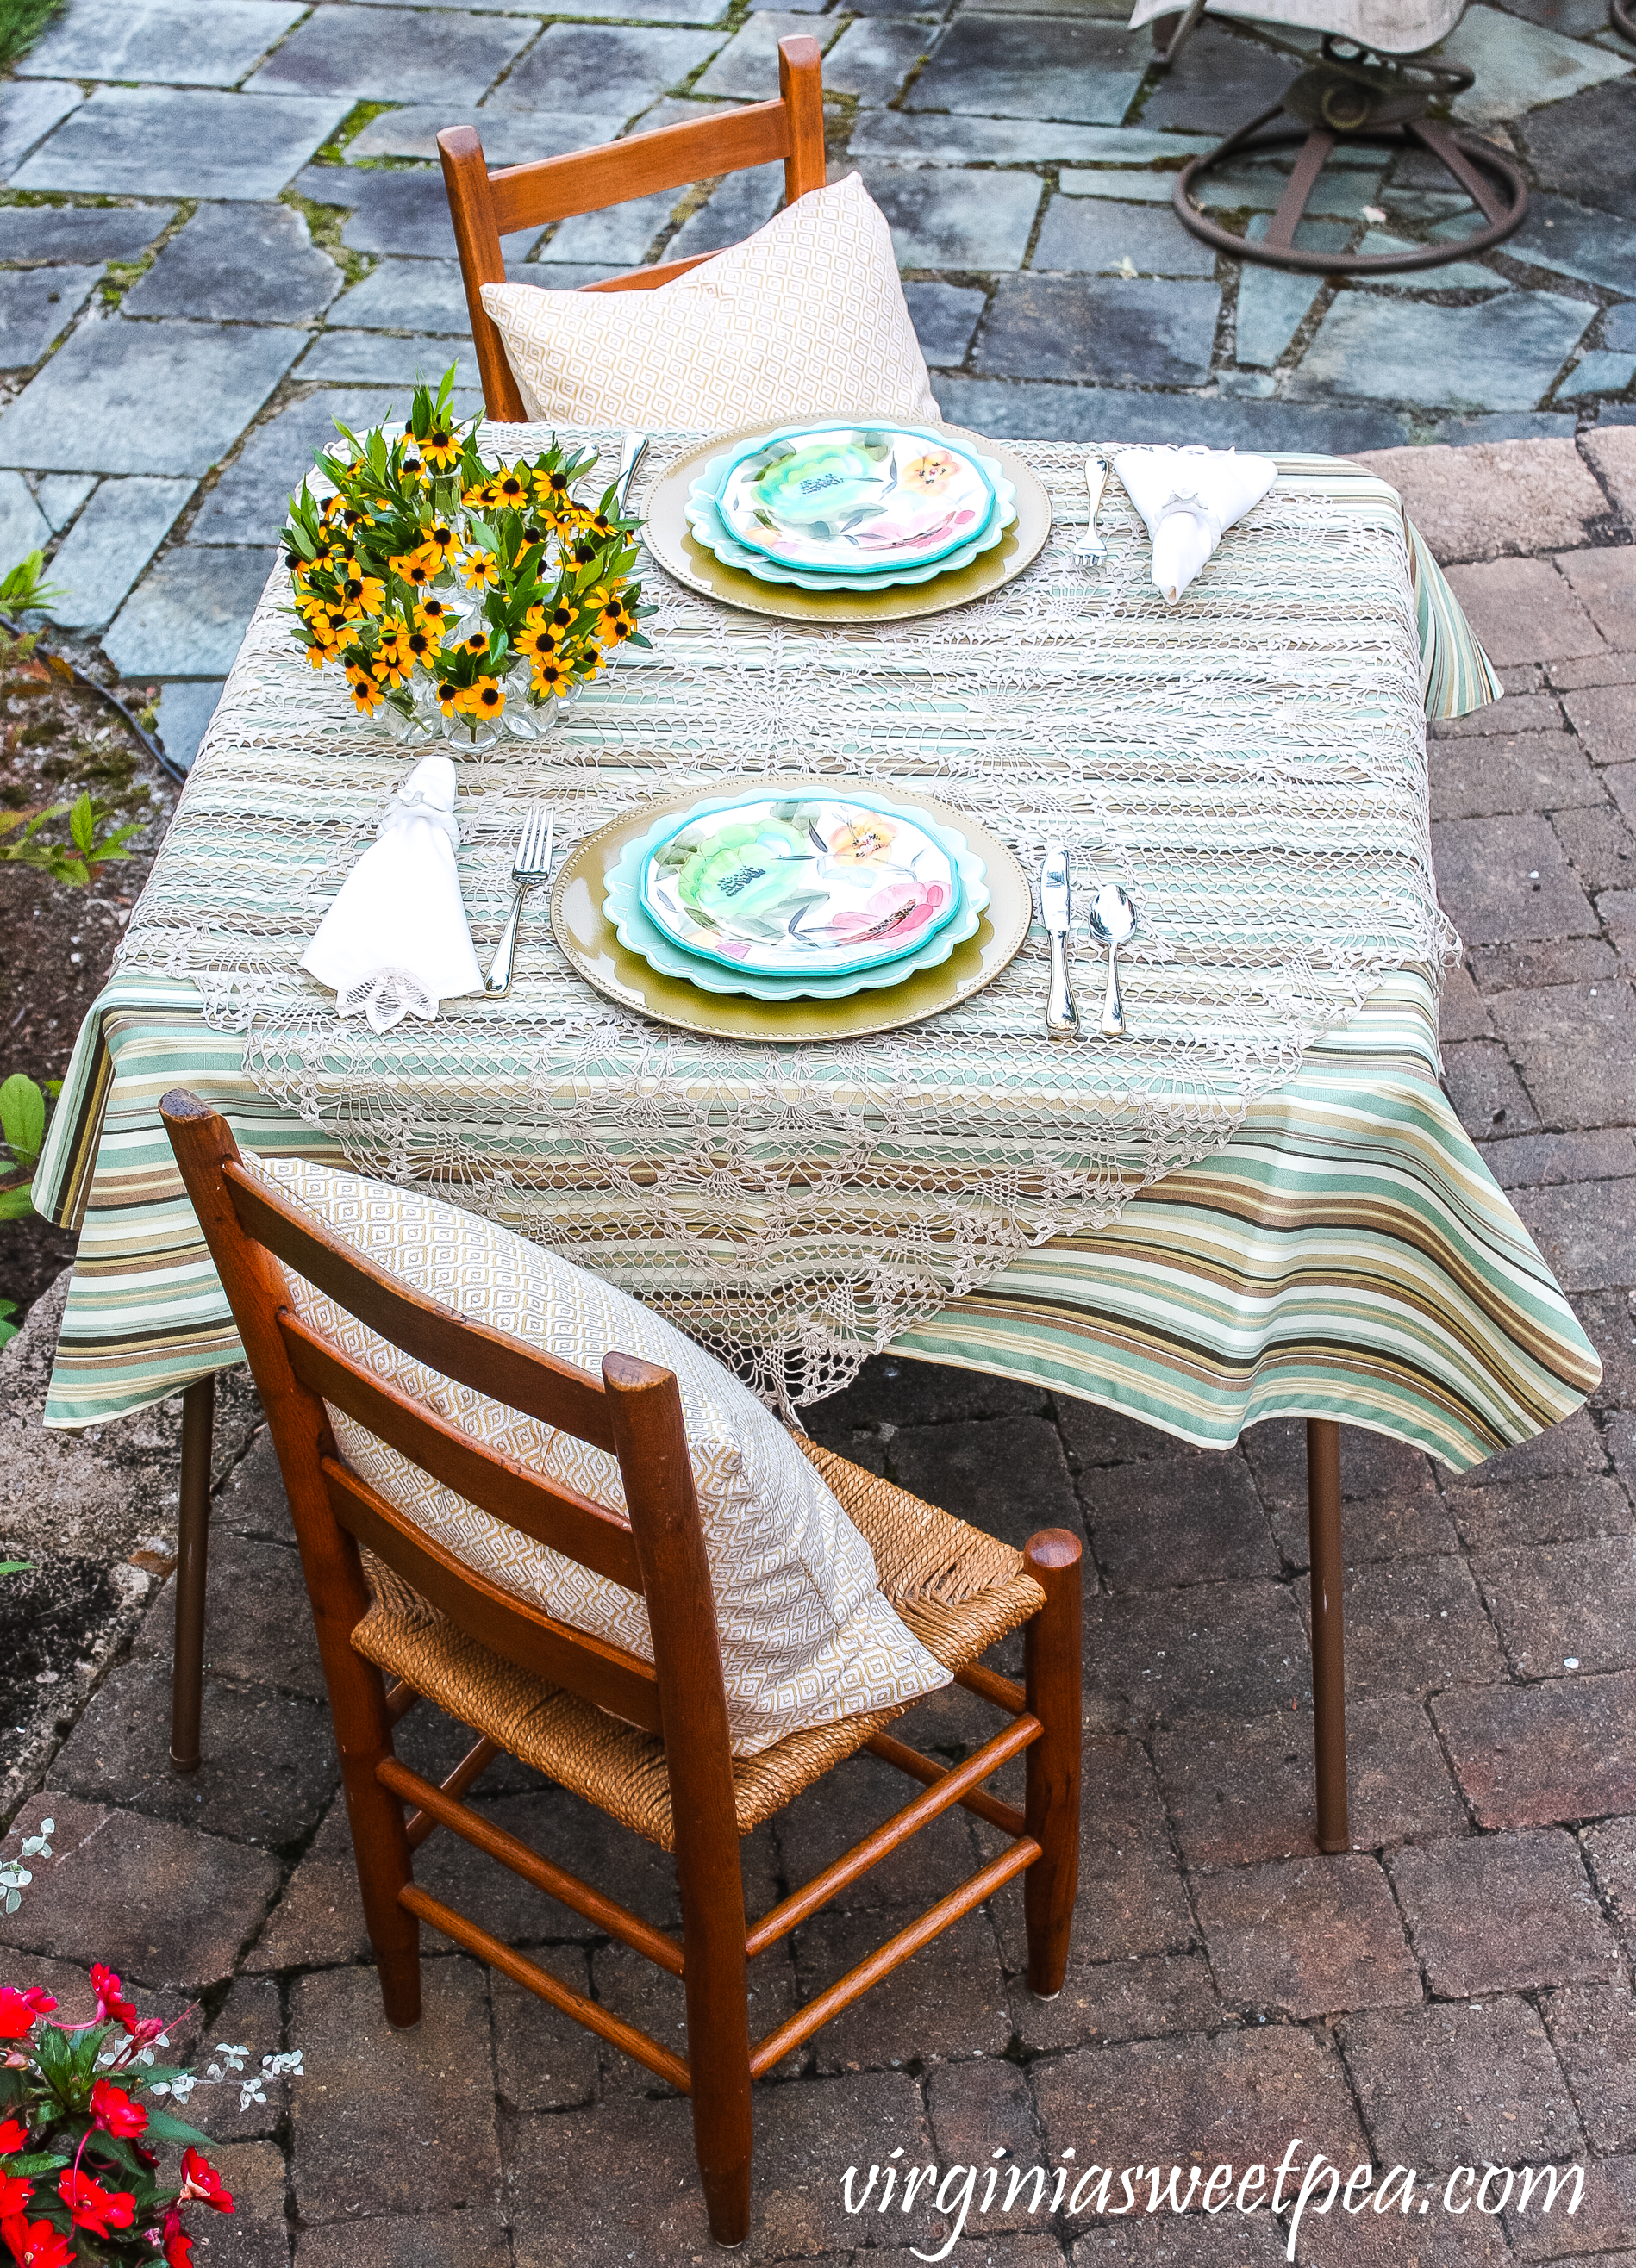 Summer tablescape set in a yard with Pioneer Woman dishes and a floral centerpiece.